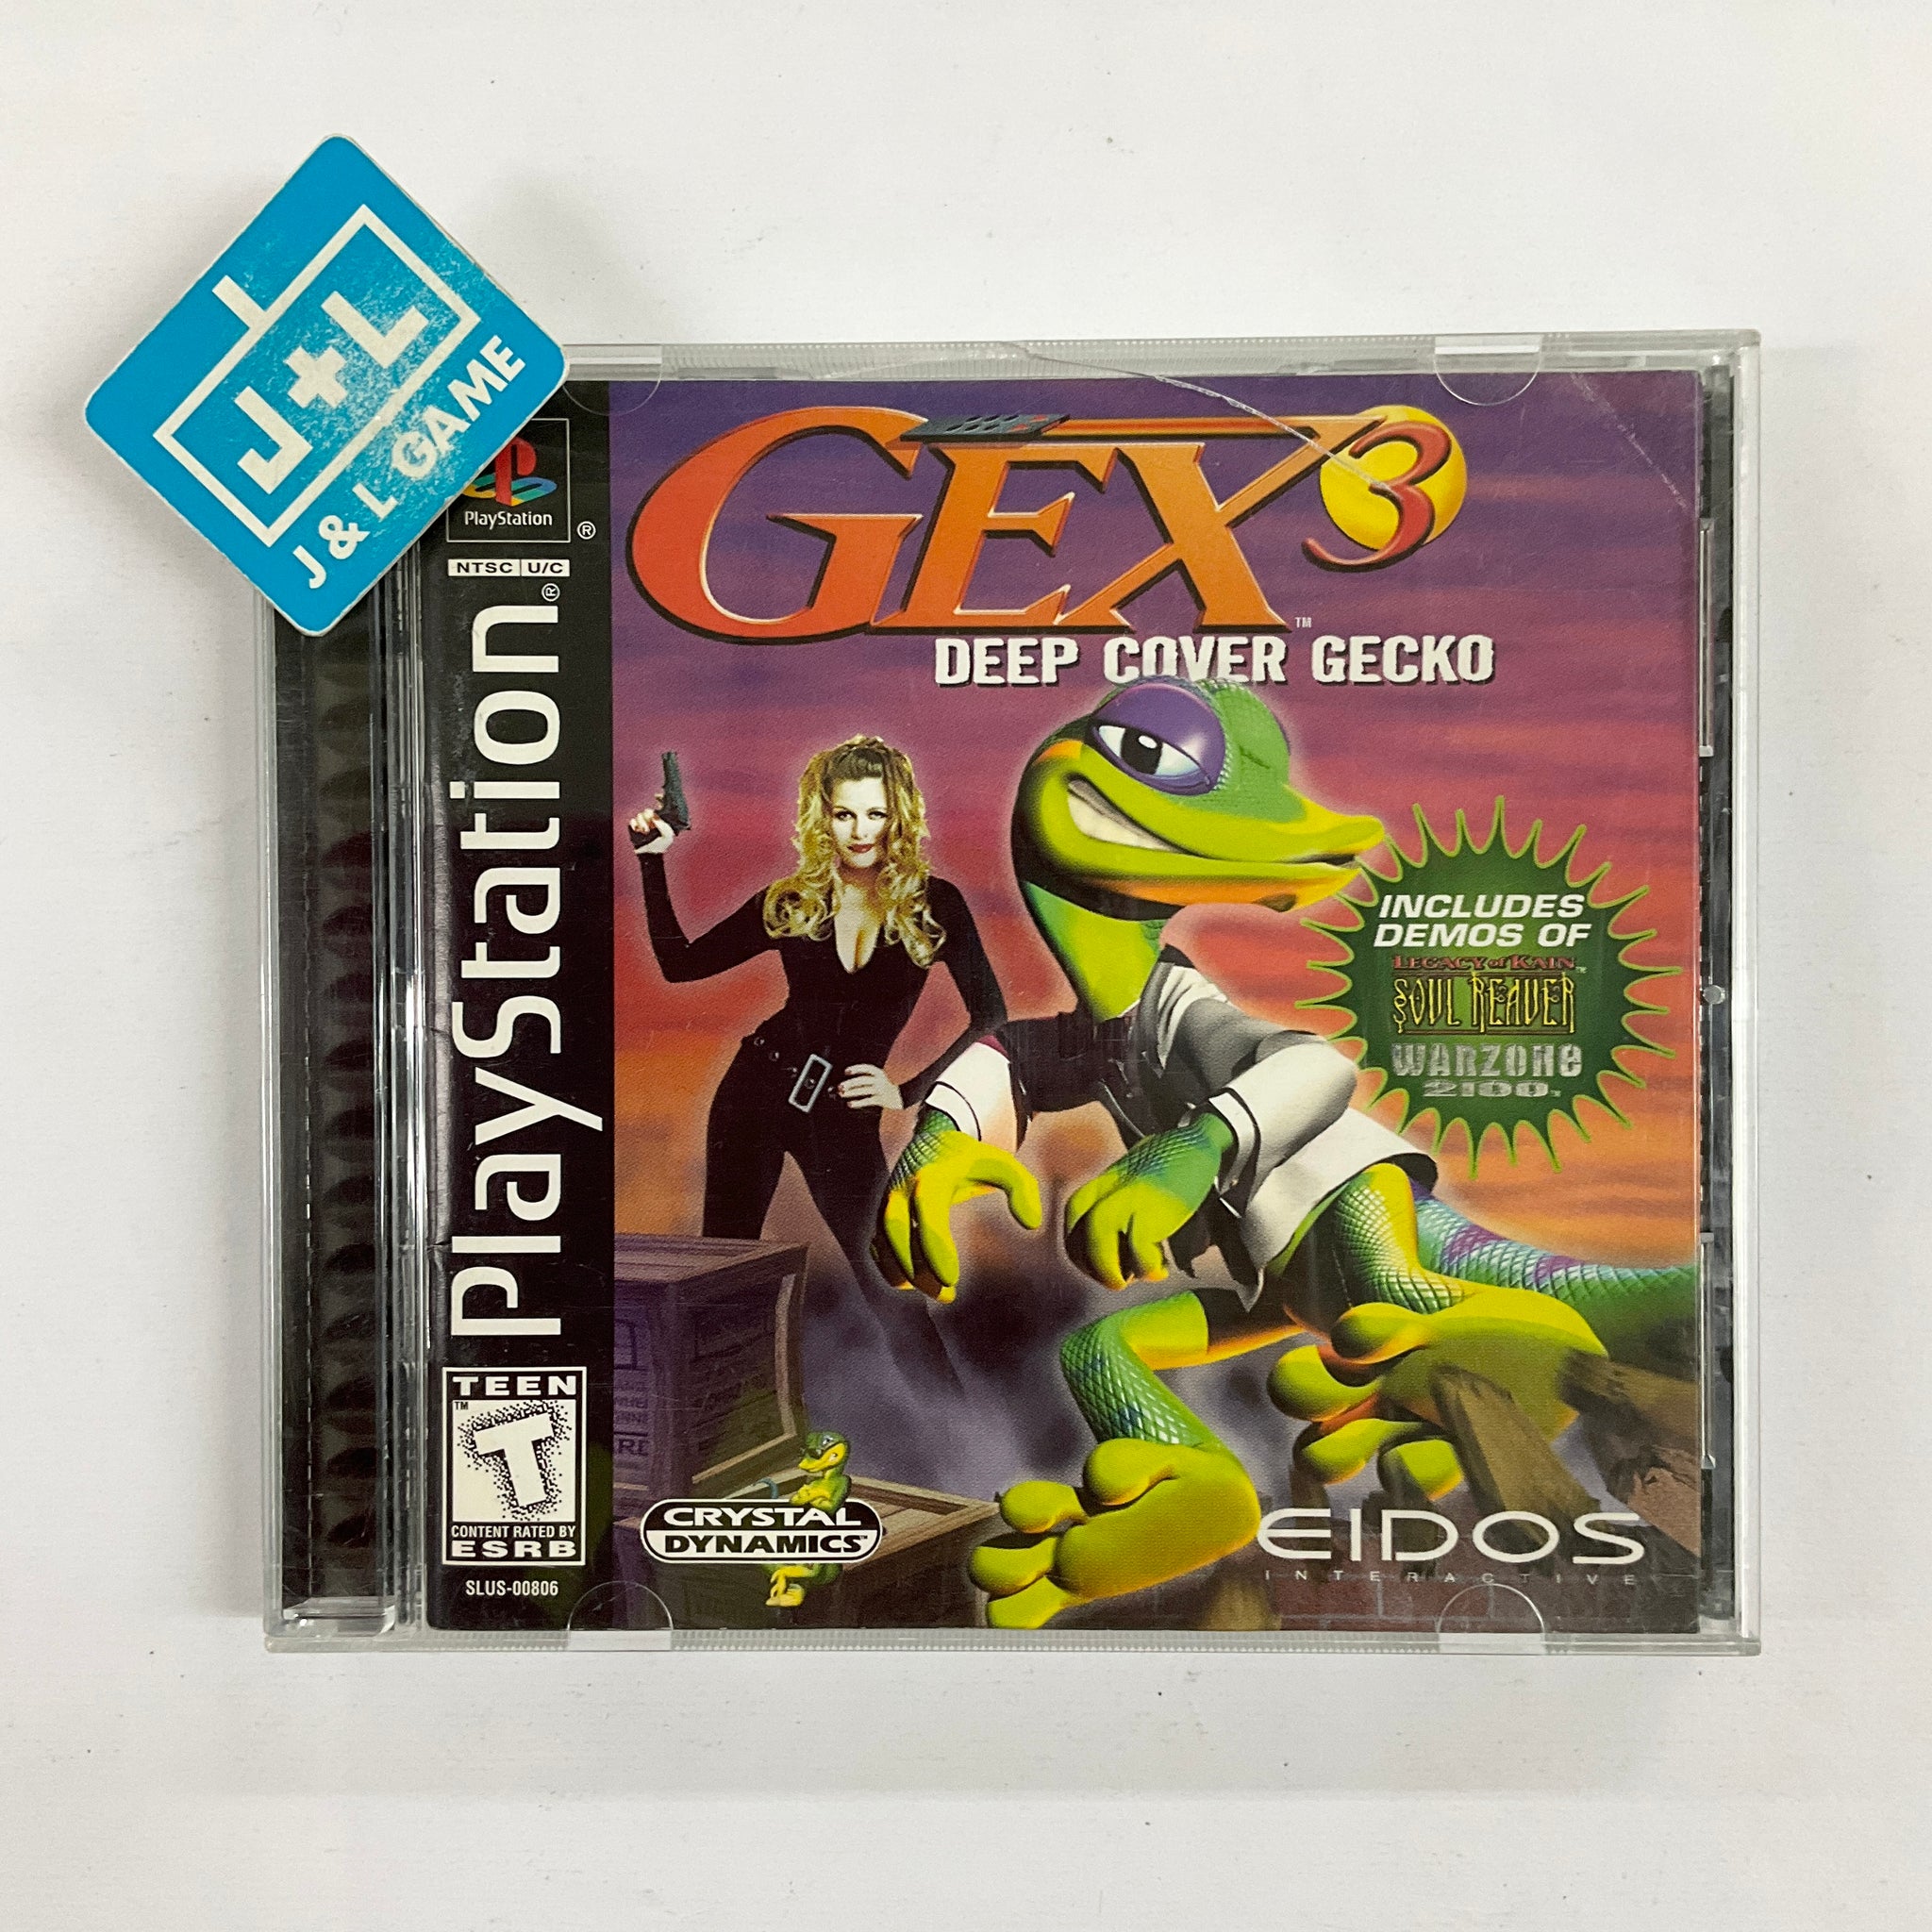 Gex 3 Deep Cover Gecko - (PS1) Playstation 1 [Pre-Owned] Video Games Eidos   